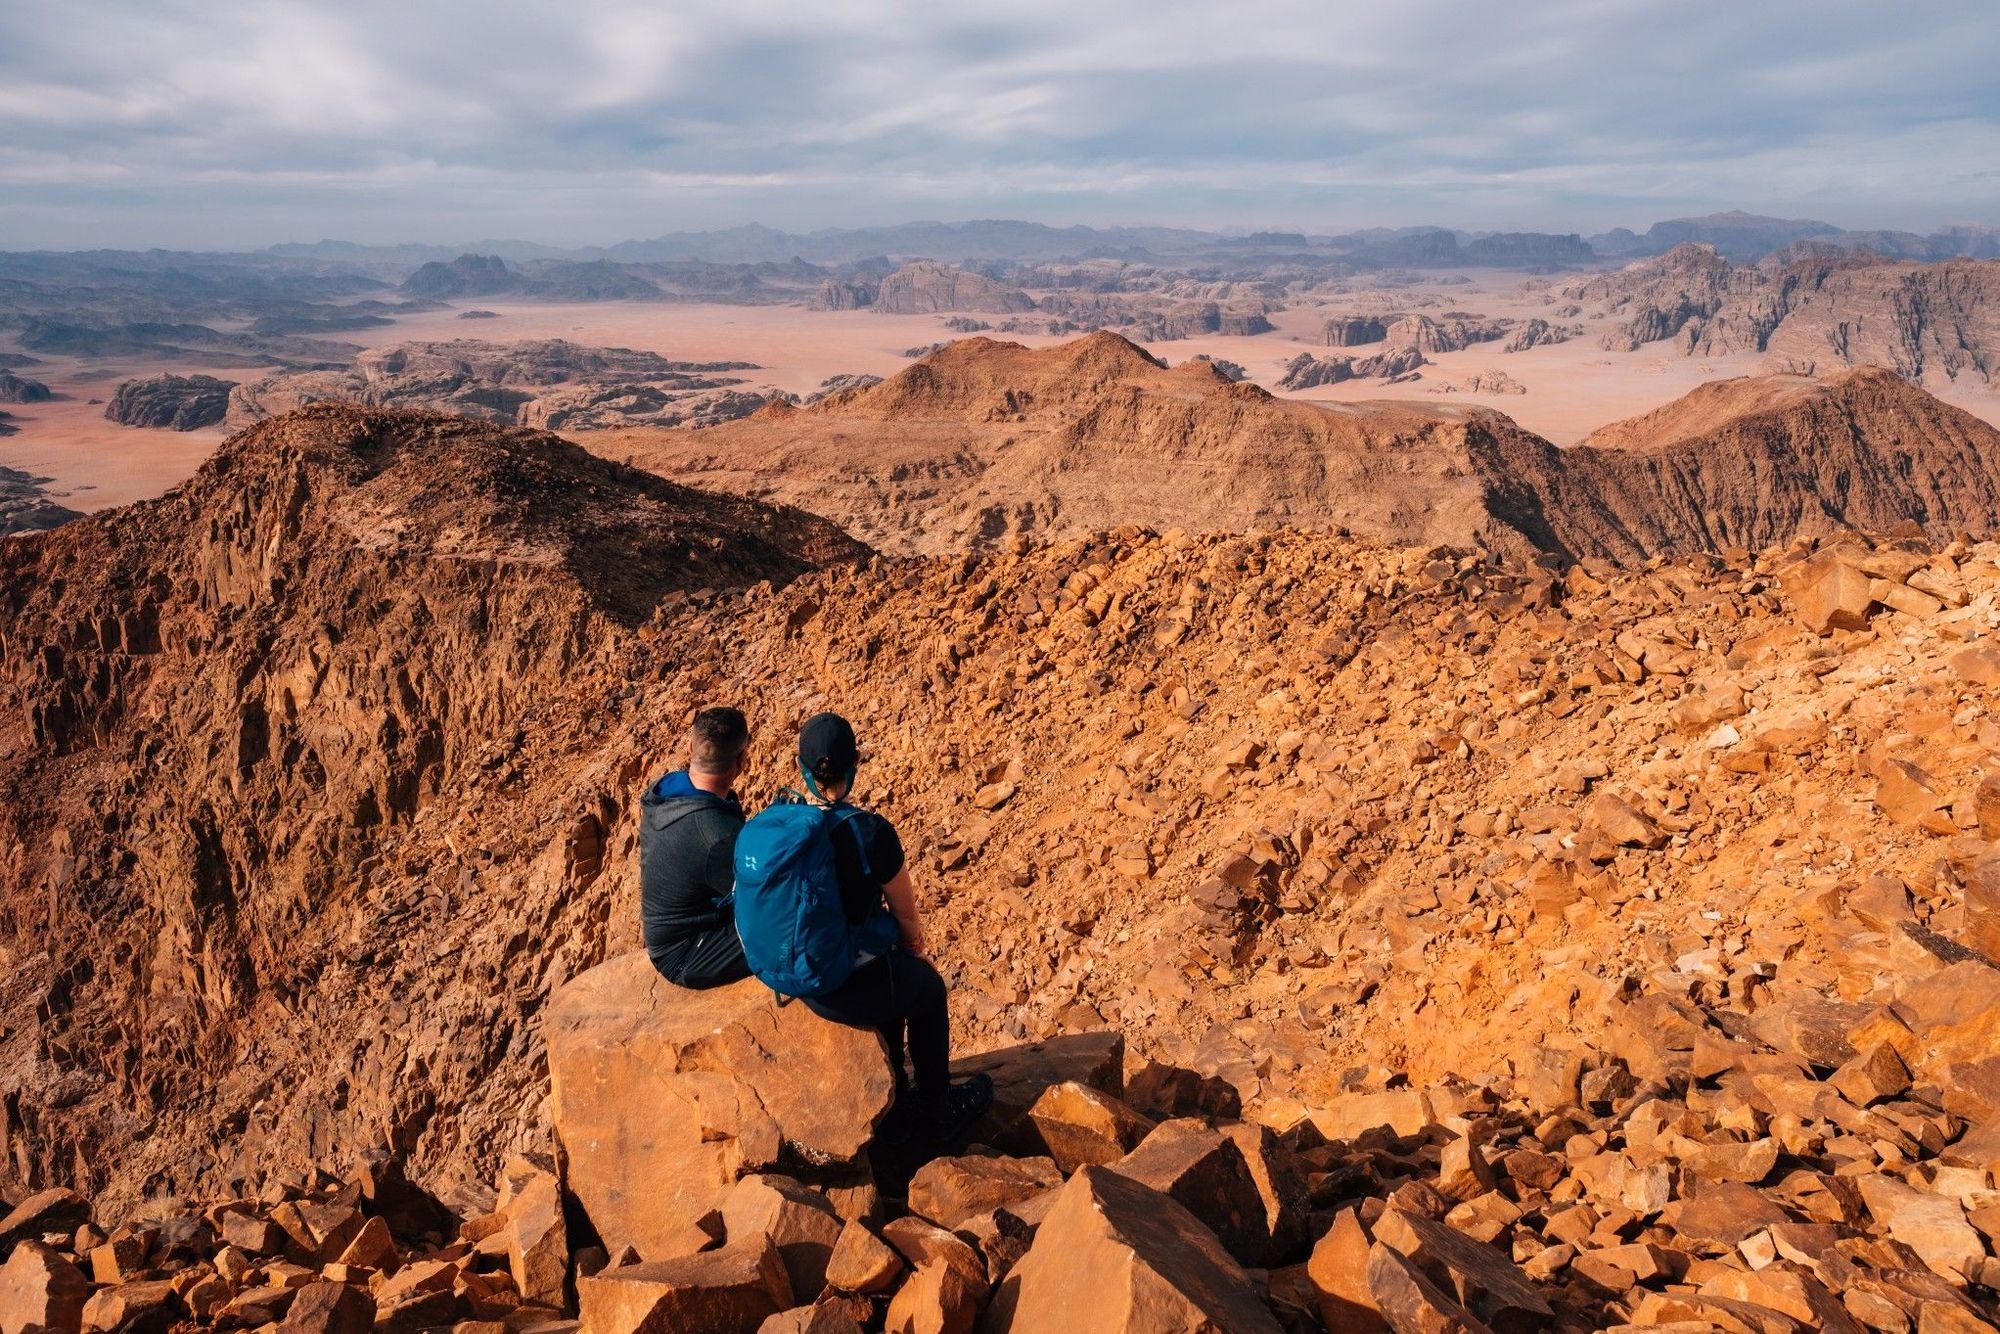 The view over Wadi Rum from Jebel Um Ad Dami. Photo: Tom Barker.